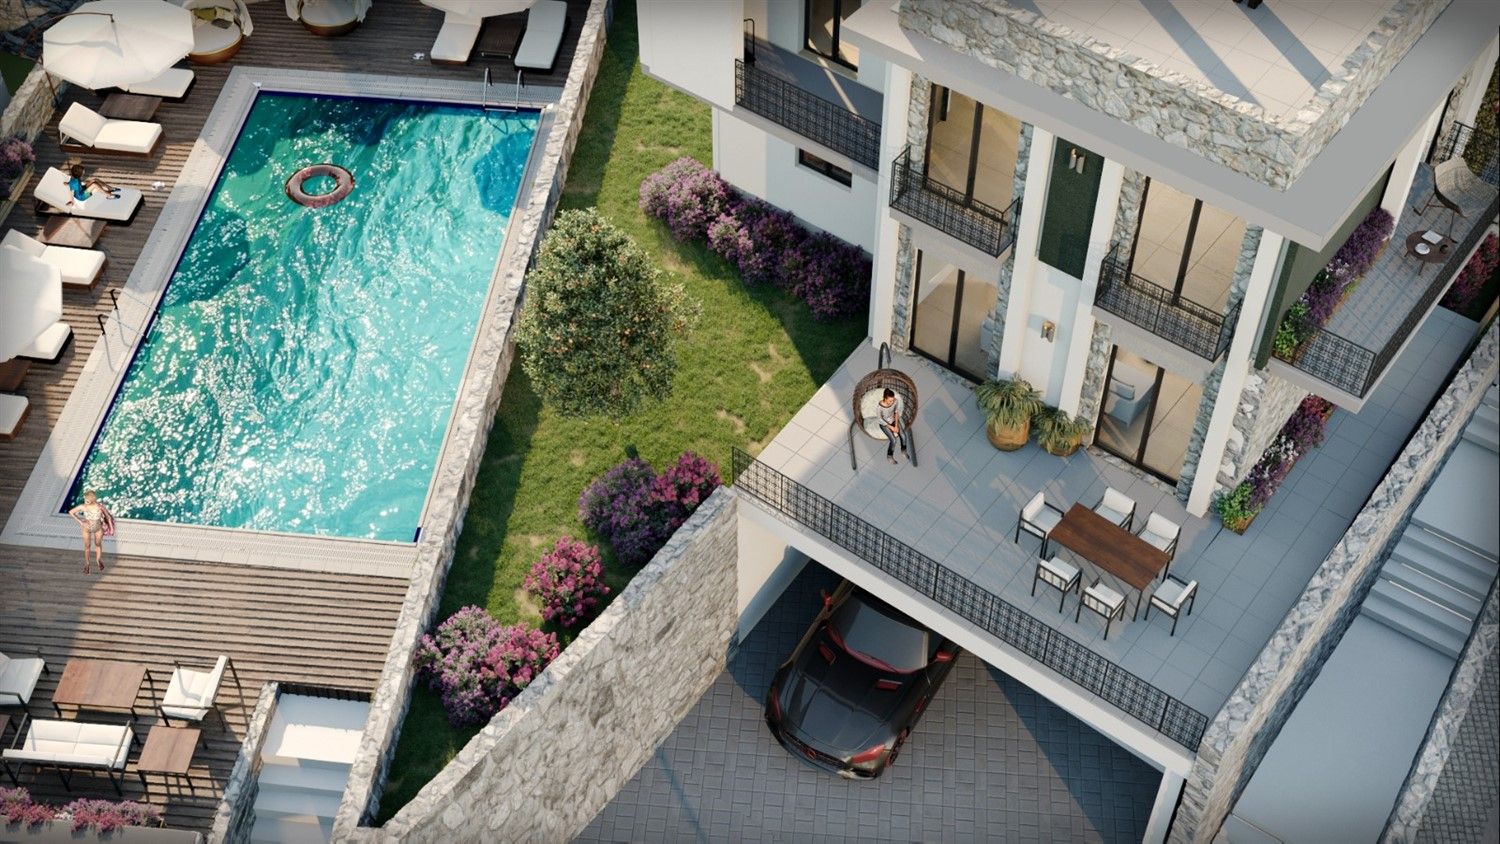 Residential project in final stage of construction in Kyrenia